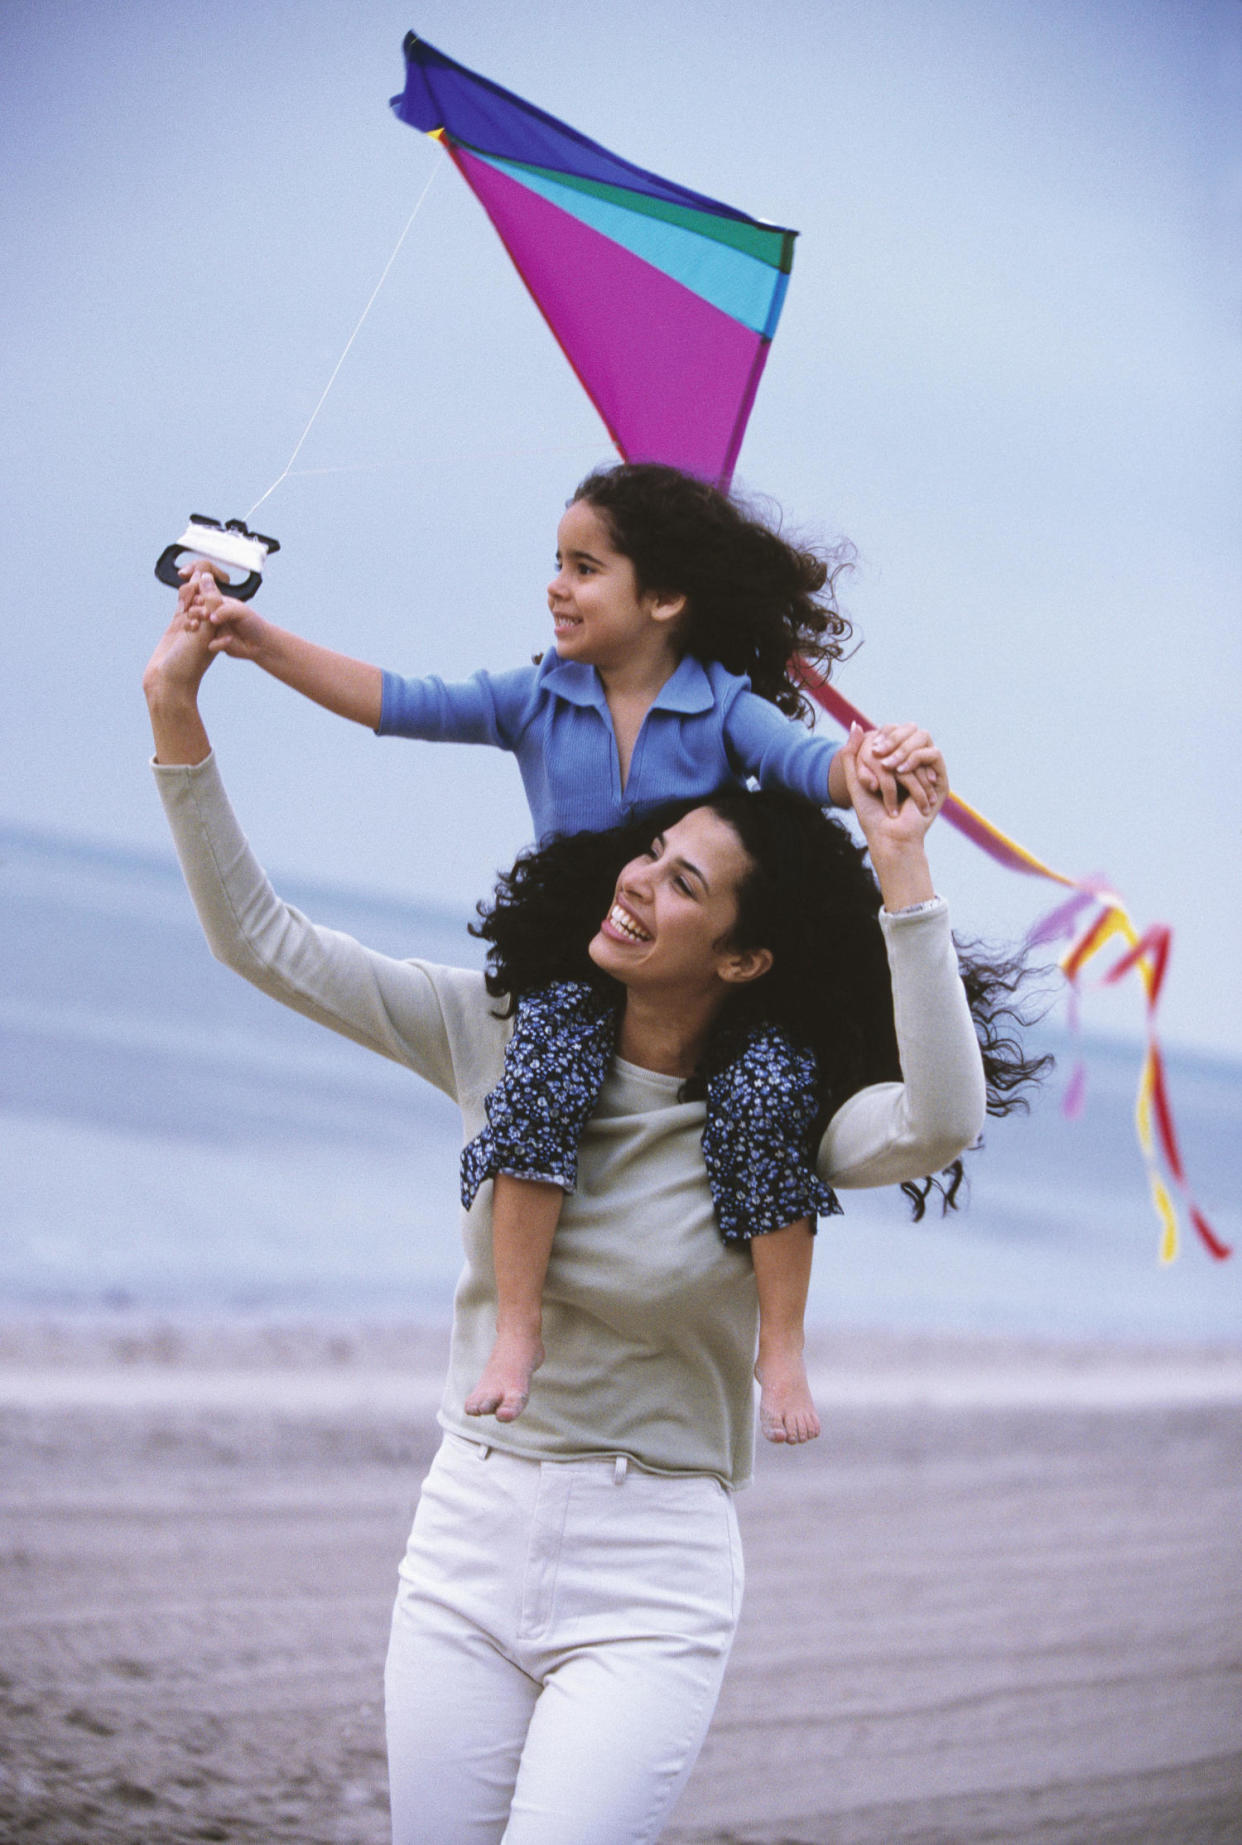 mother and daughter flying at kite at beach (Ariel Skelley / Getty Images)